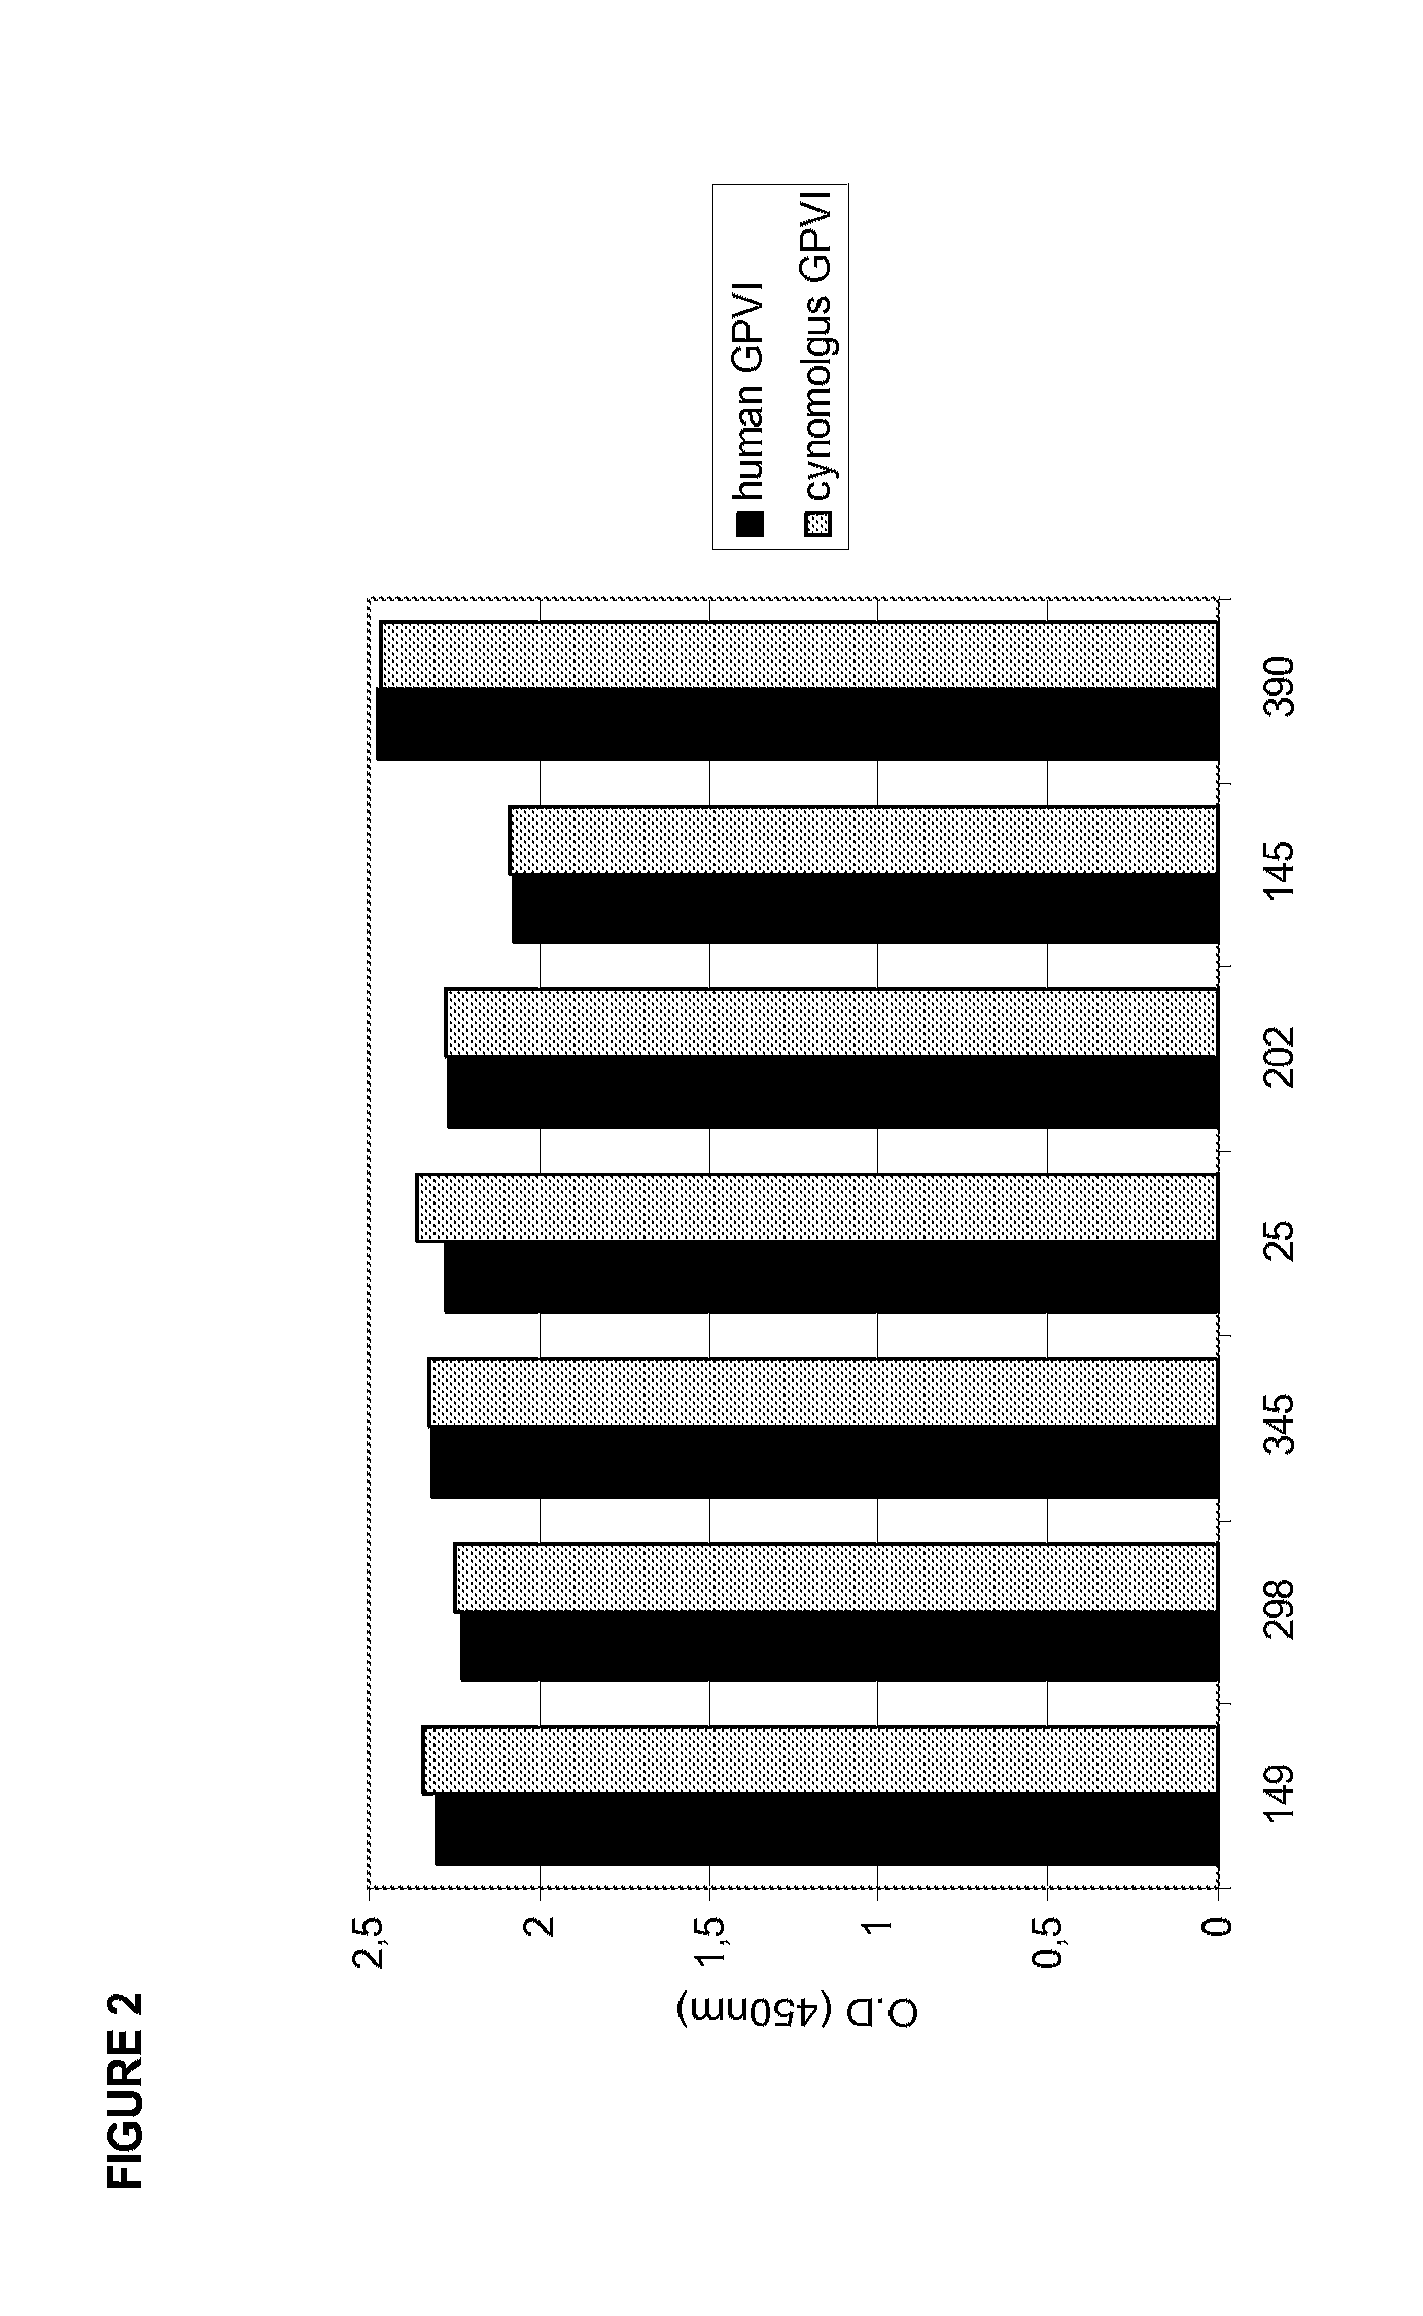 Novel antagonist antibodies and their fab fragments against gpvi and uses thereof